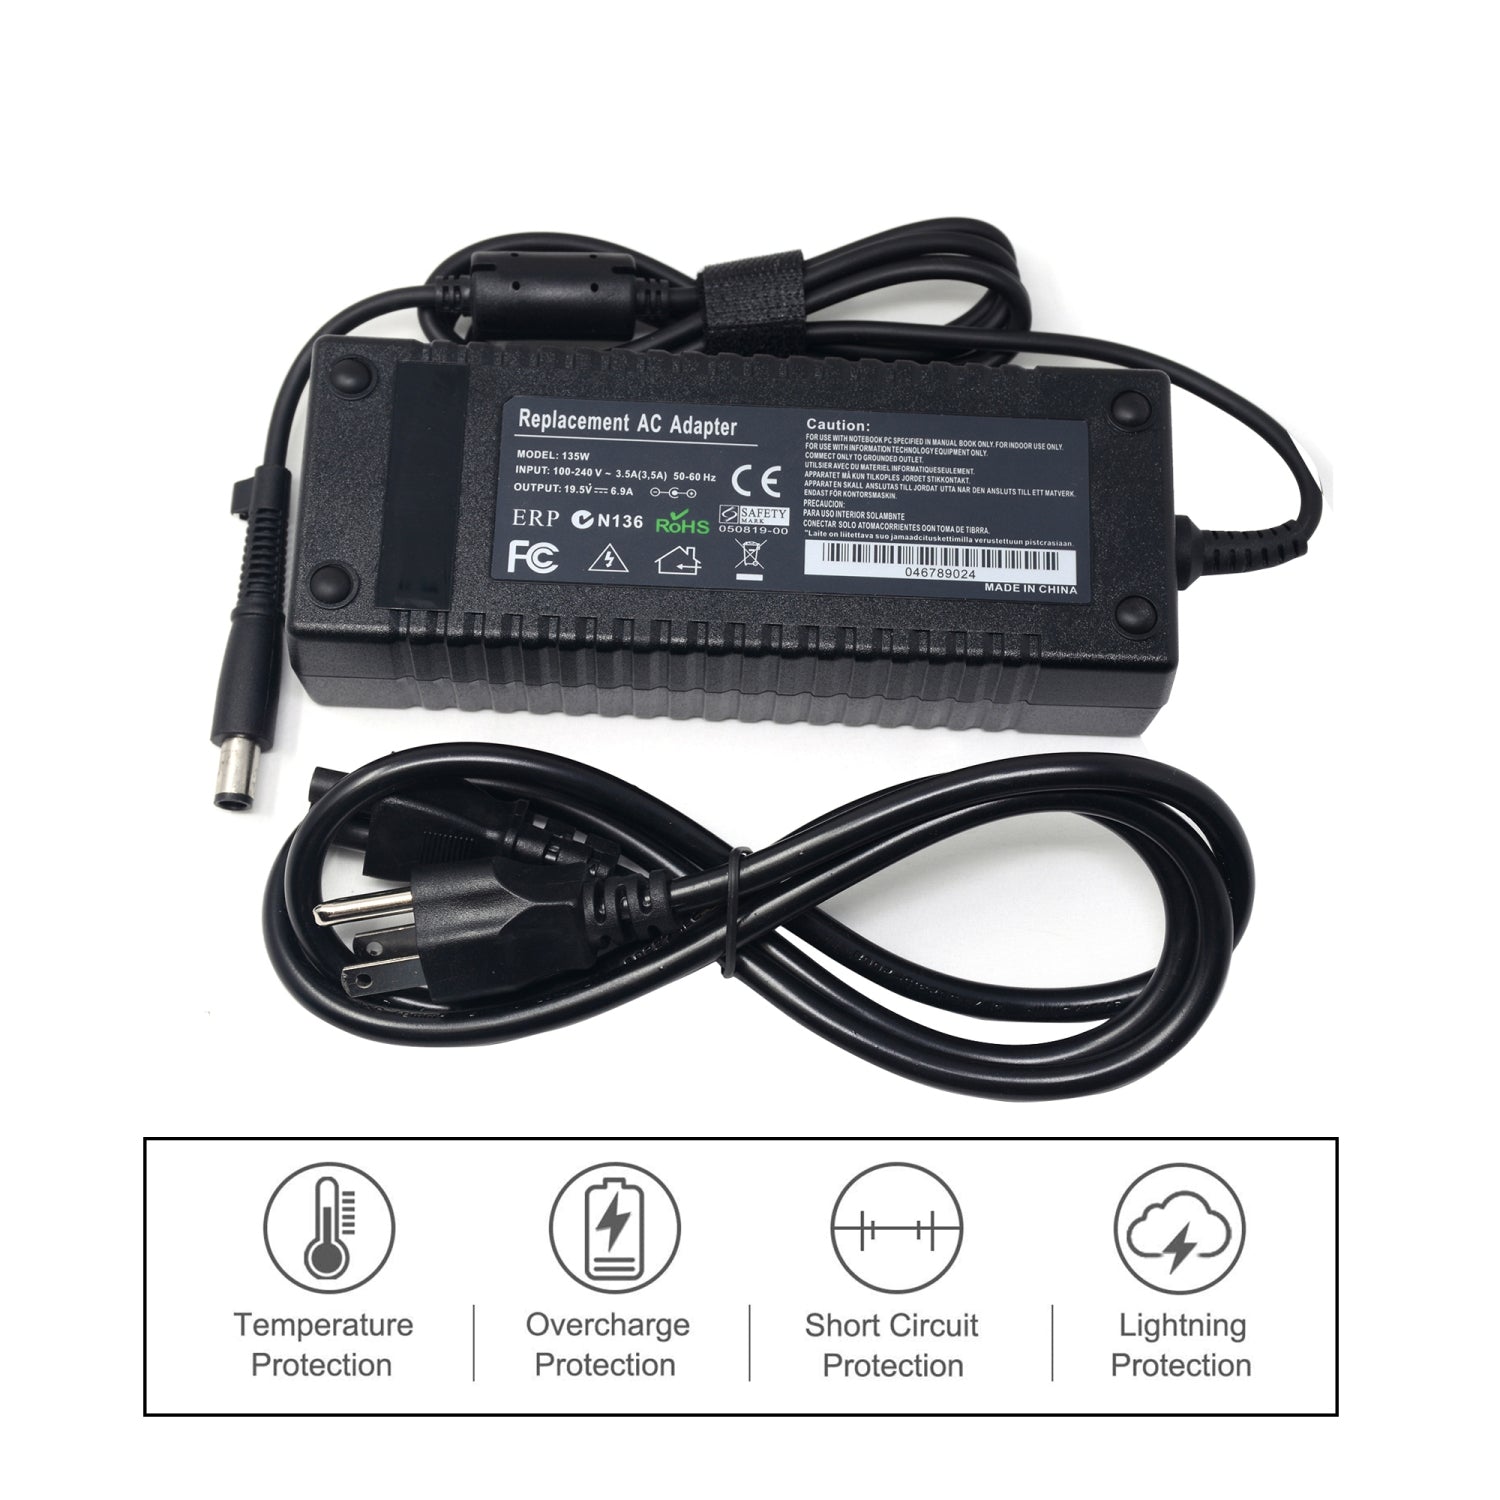 NEW 135W AC adapter charger for HP 19.5V/6.9A Desktop Power Adapter Compatible with HP Desktop 8200 8000 DC7800 Desktop